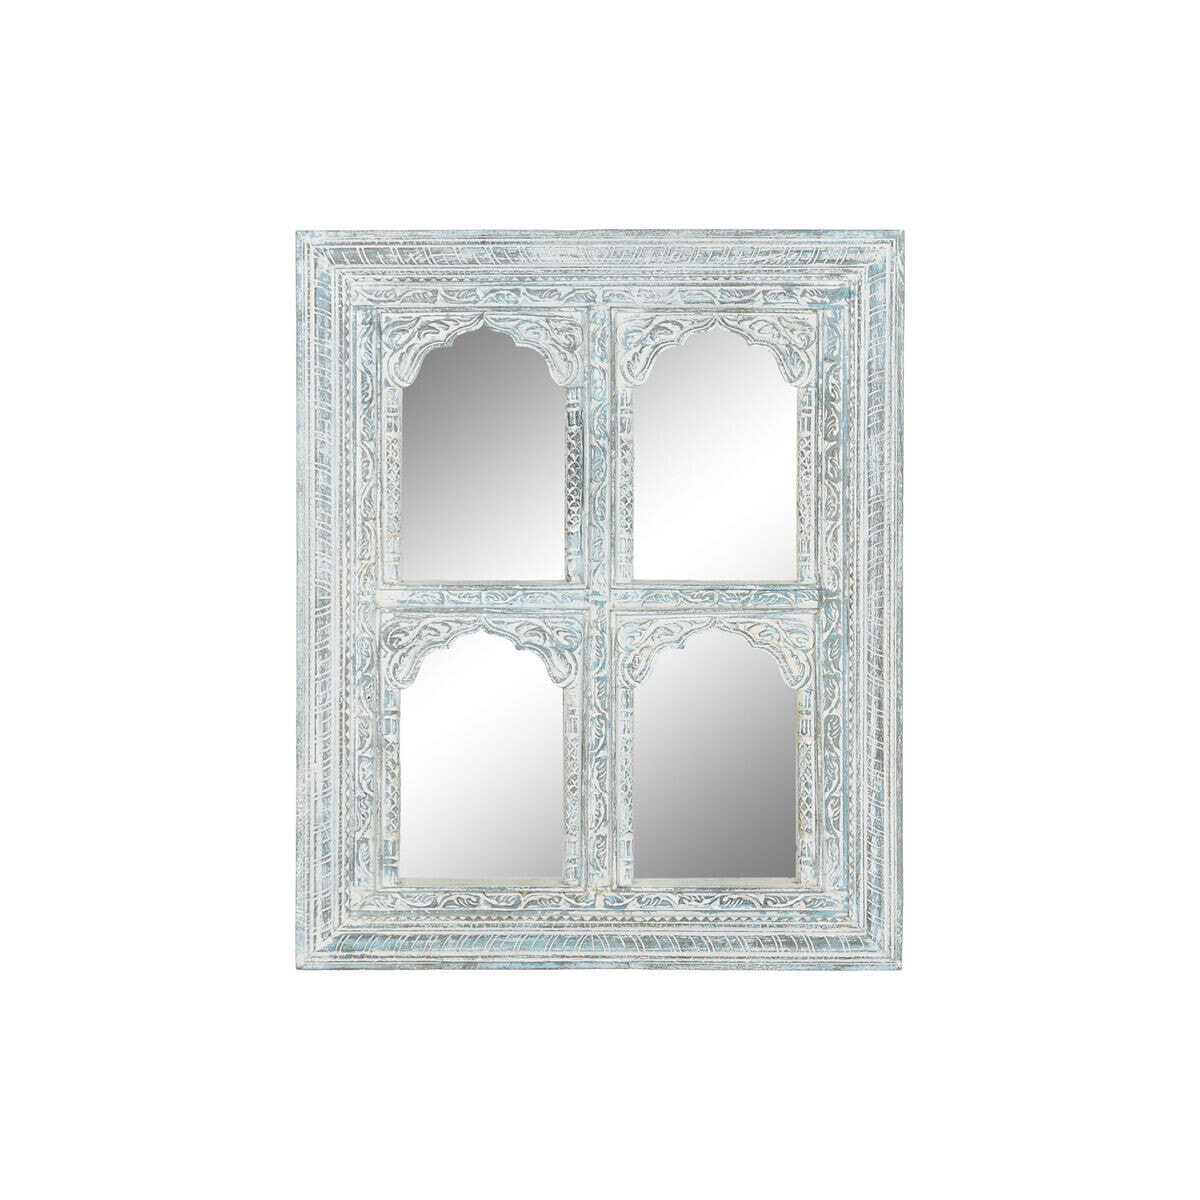 Wall mirror Home ESPRIT Turquoise Wood Stripped 110 x 8 x 1120 cm